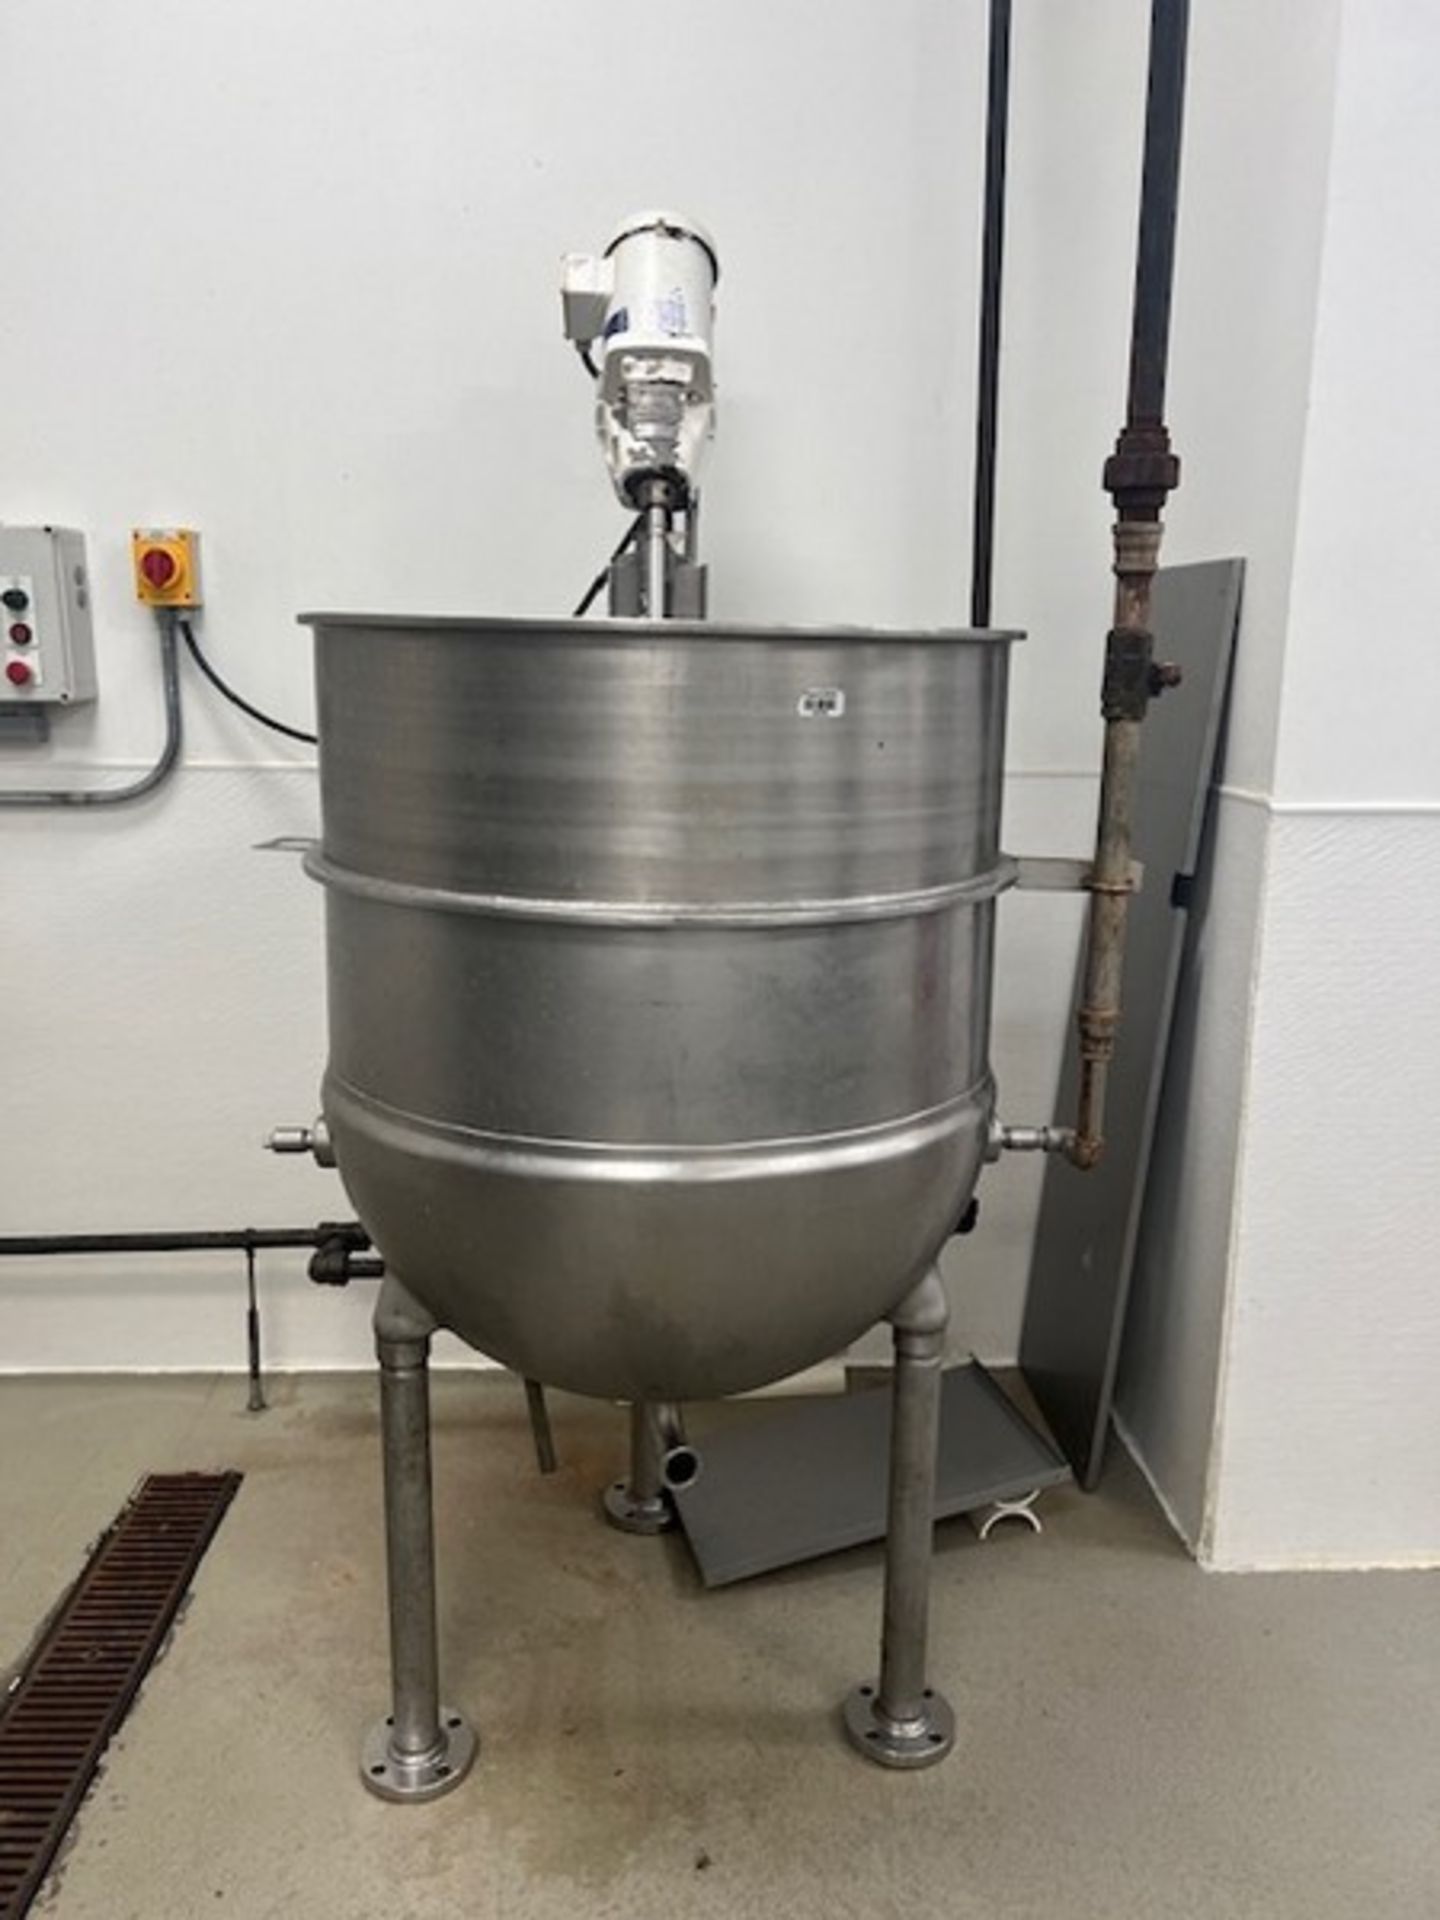 Groen 100 Gal. Steam Jacketed Tank with 2-Blade, 2 hp, 3 Phase Chemineer Mixer, 2" Tri-Clamp